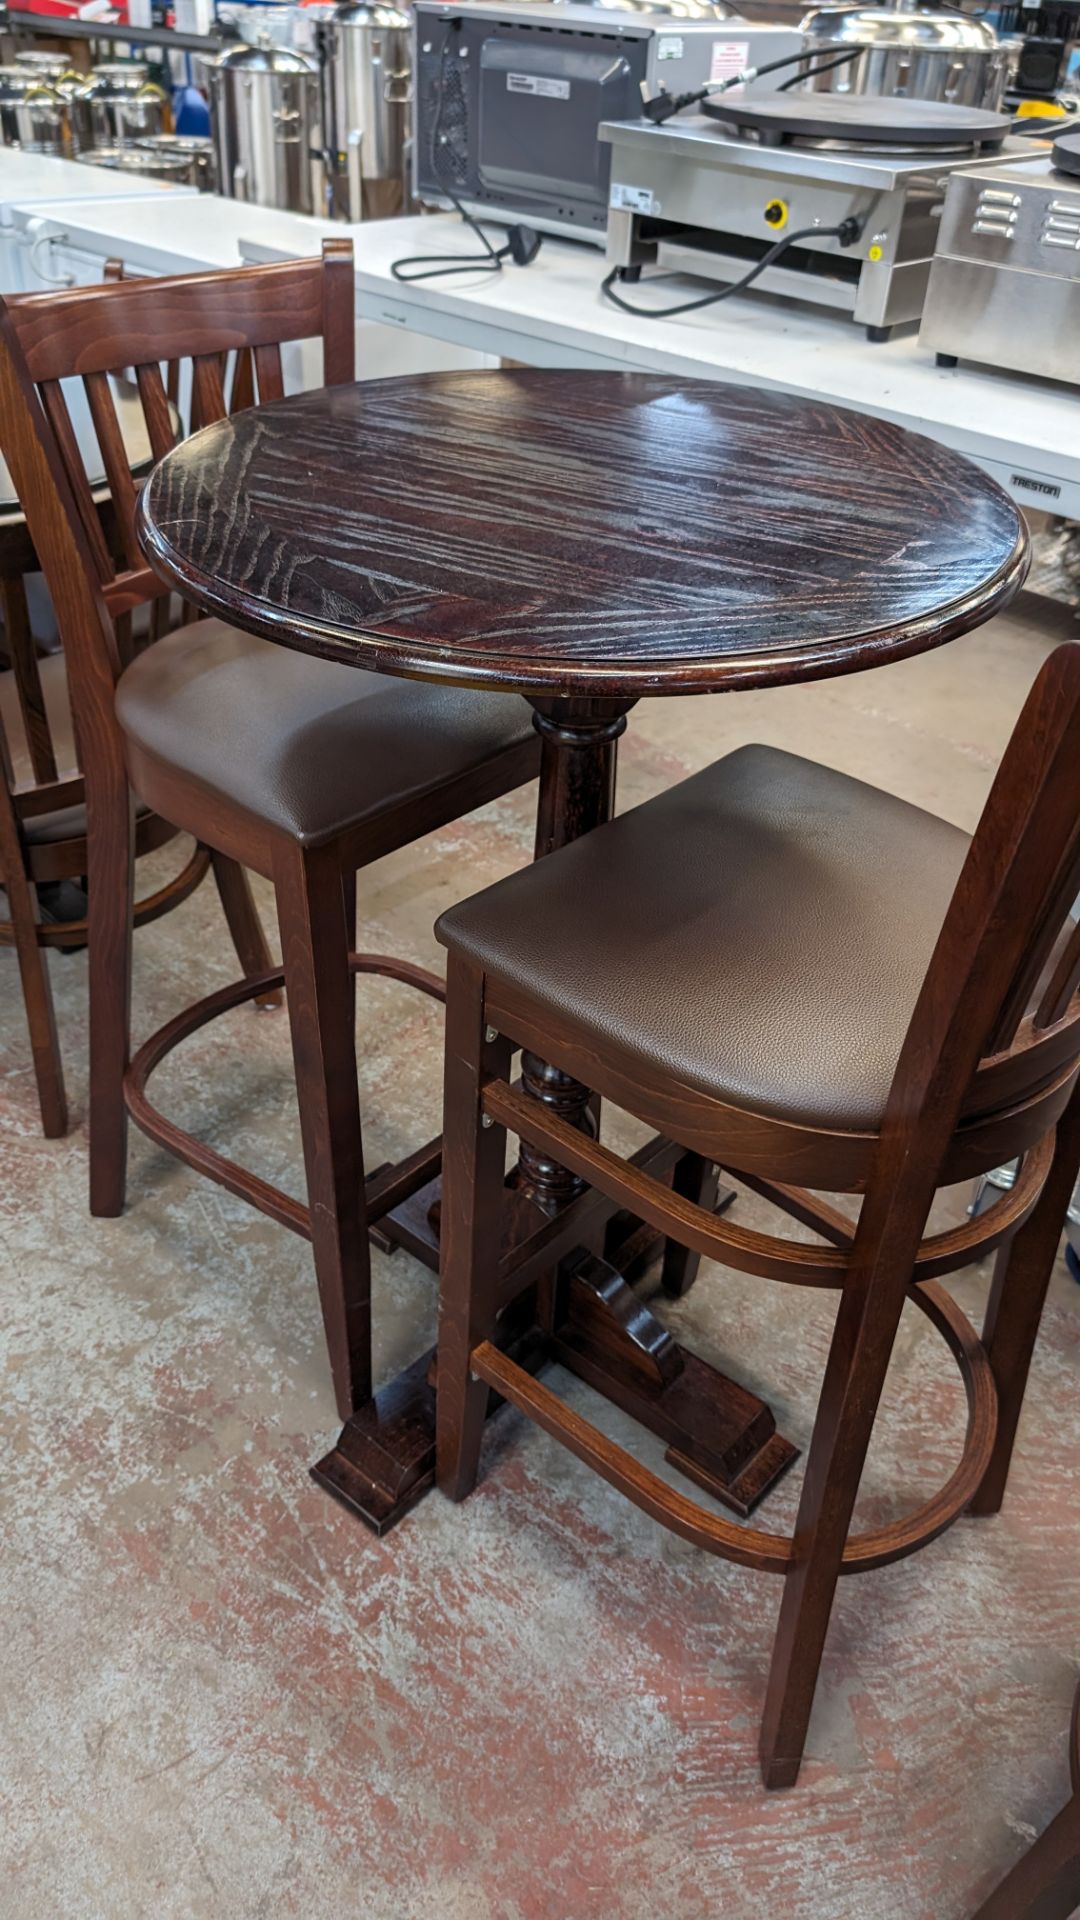 3 off tall single pedestal round bar tables (two different finishes) - Image 4 of 5